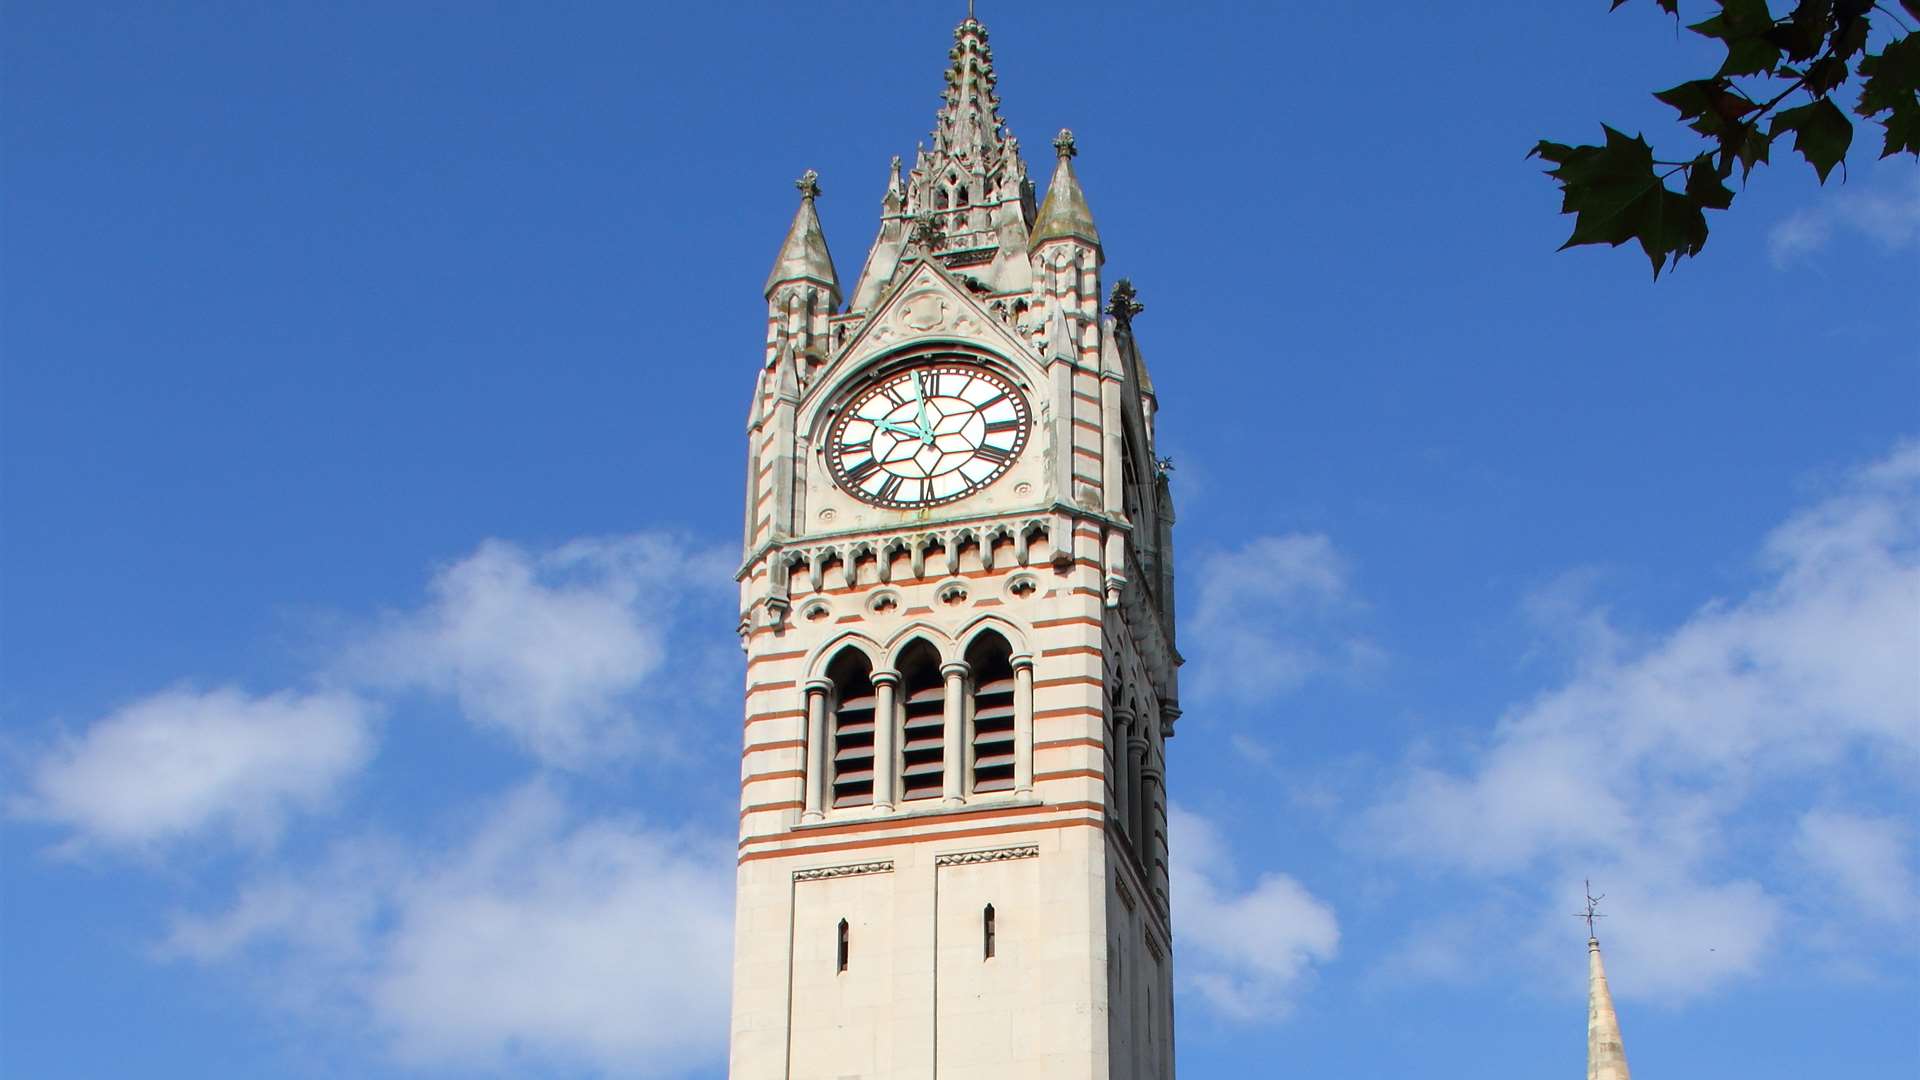 The Clock Tower at the top of Harmer Street